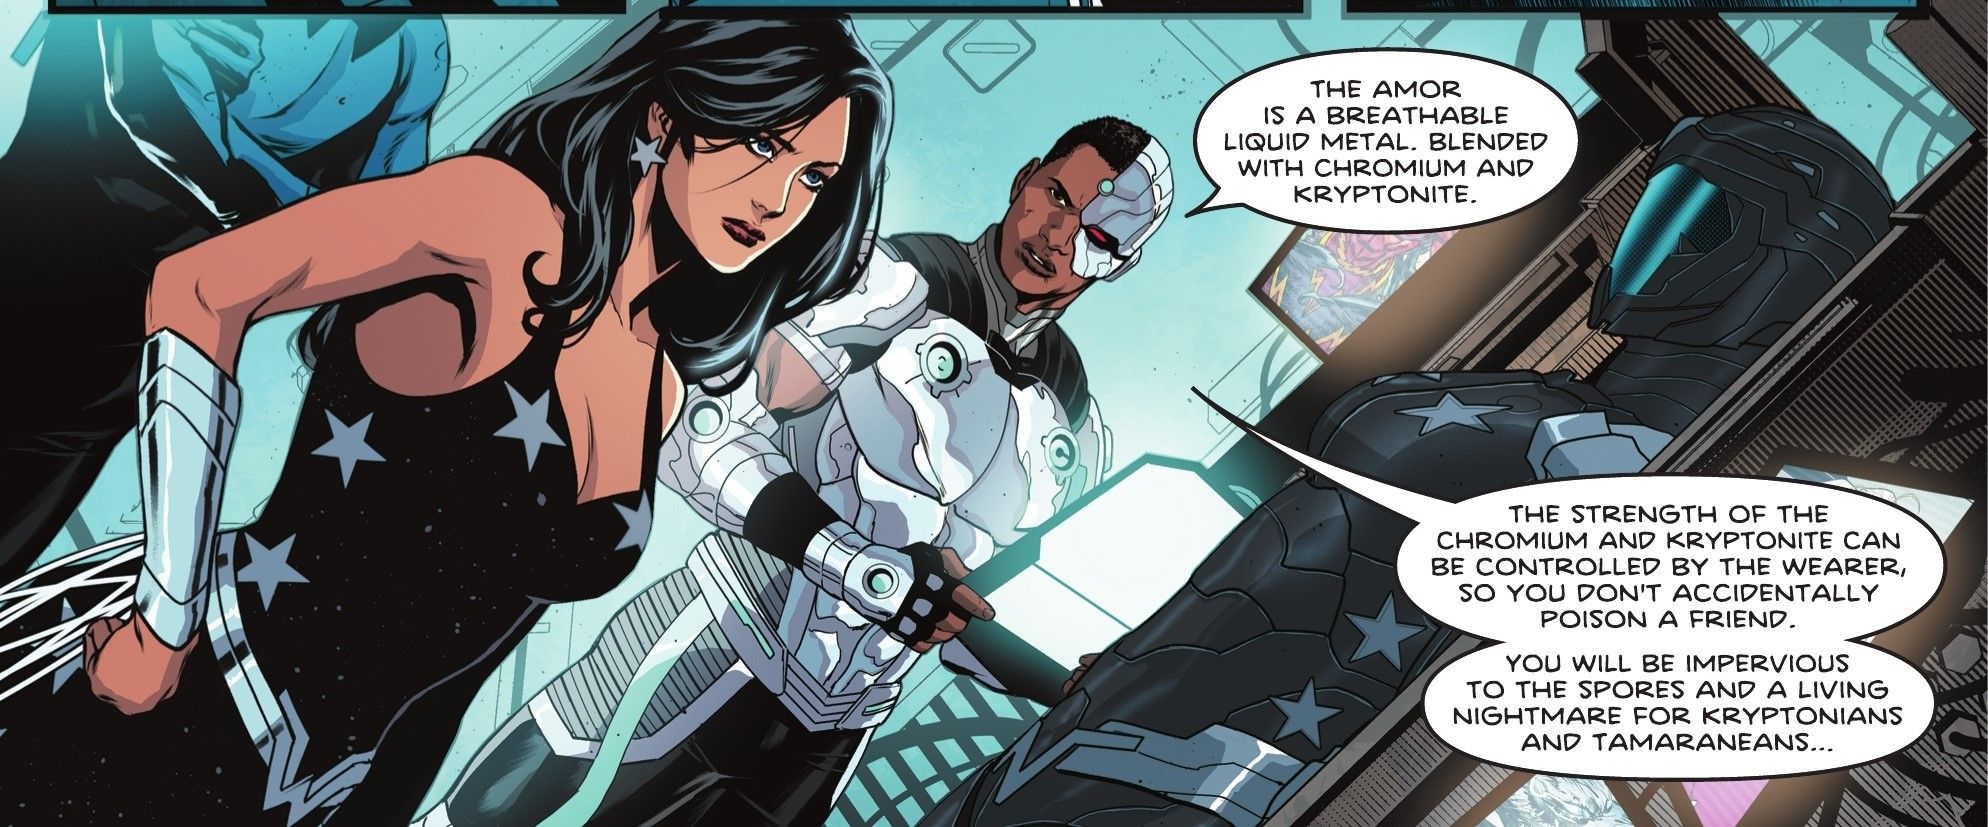 Titans Beast World #6 Donna Troy talking to Cyborg about her new suit